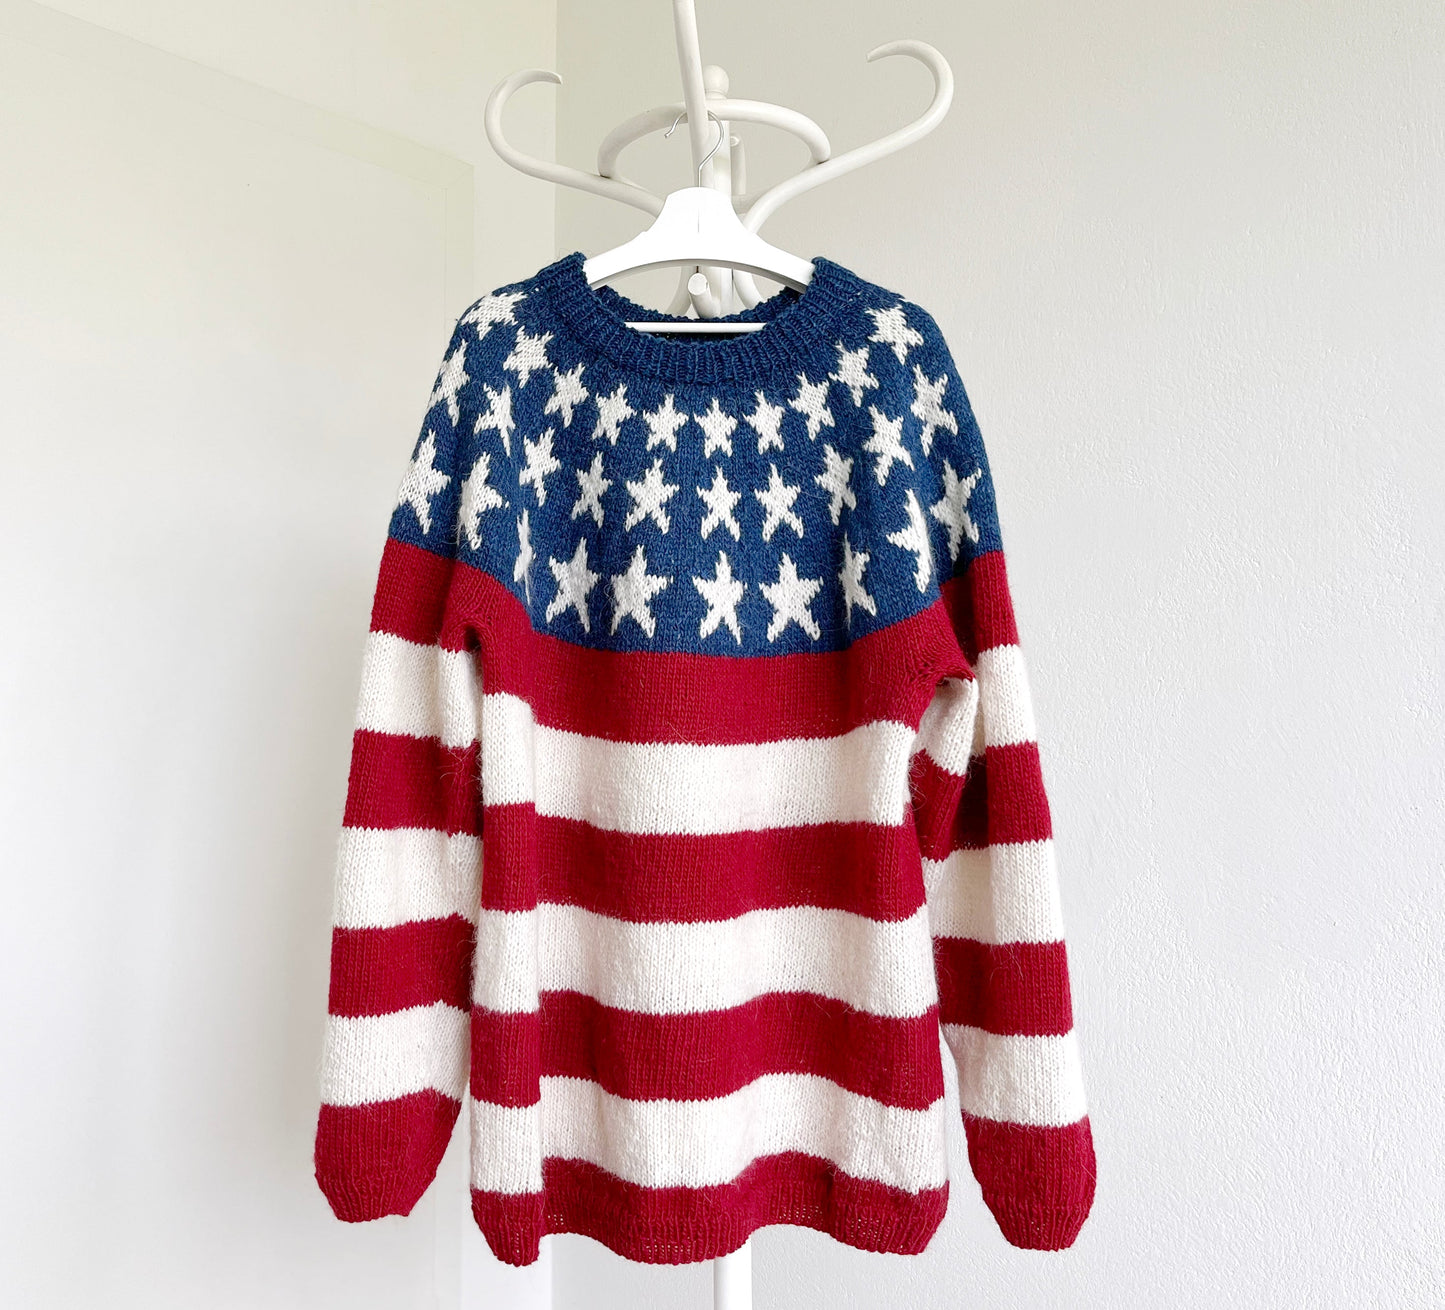 Hand-knitted lopapeysa sweater in the USA FLAG design made with pure Icelandic wool